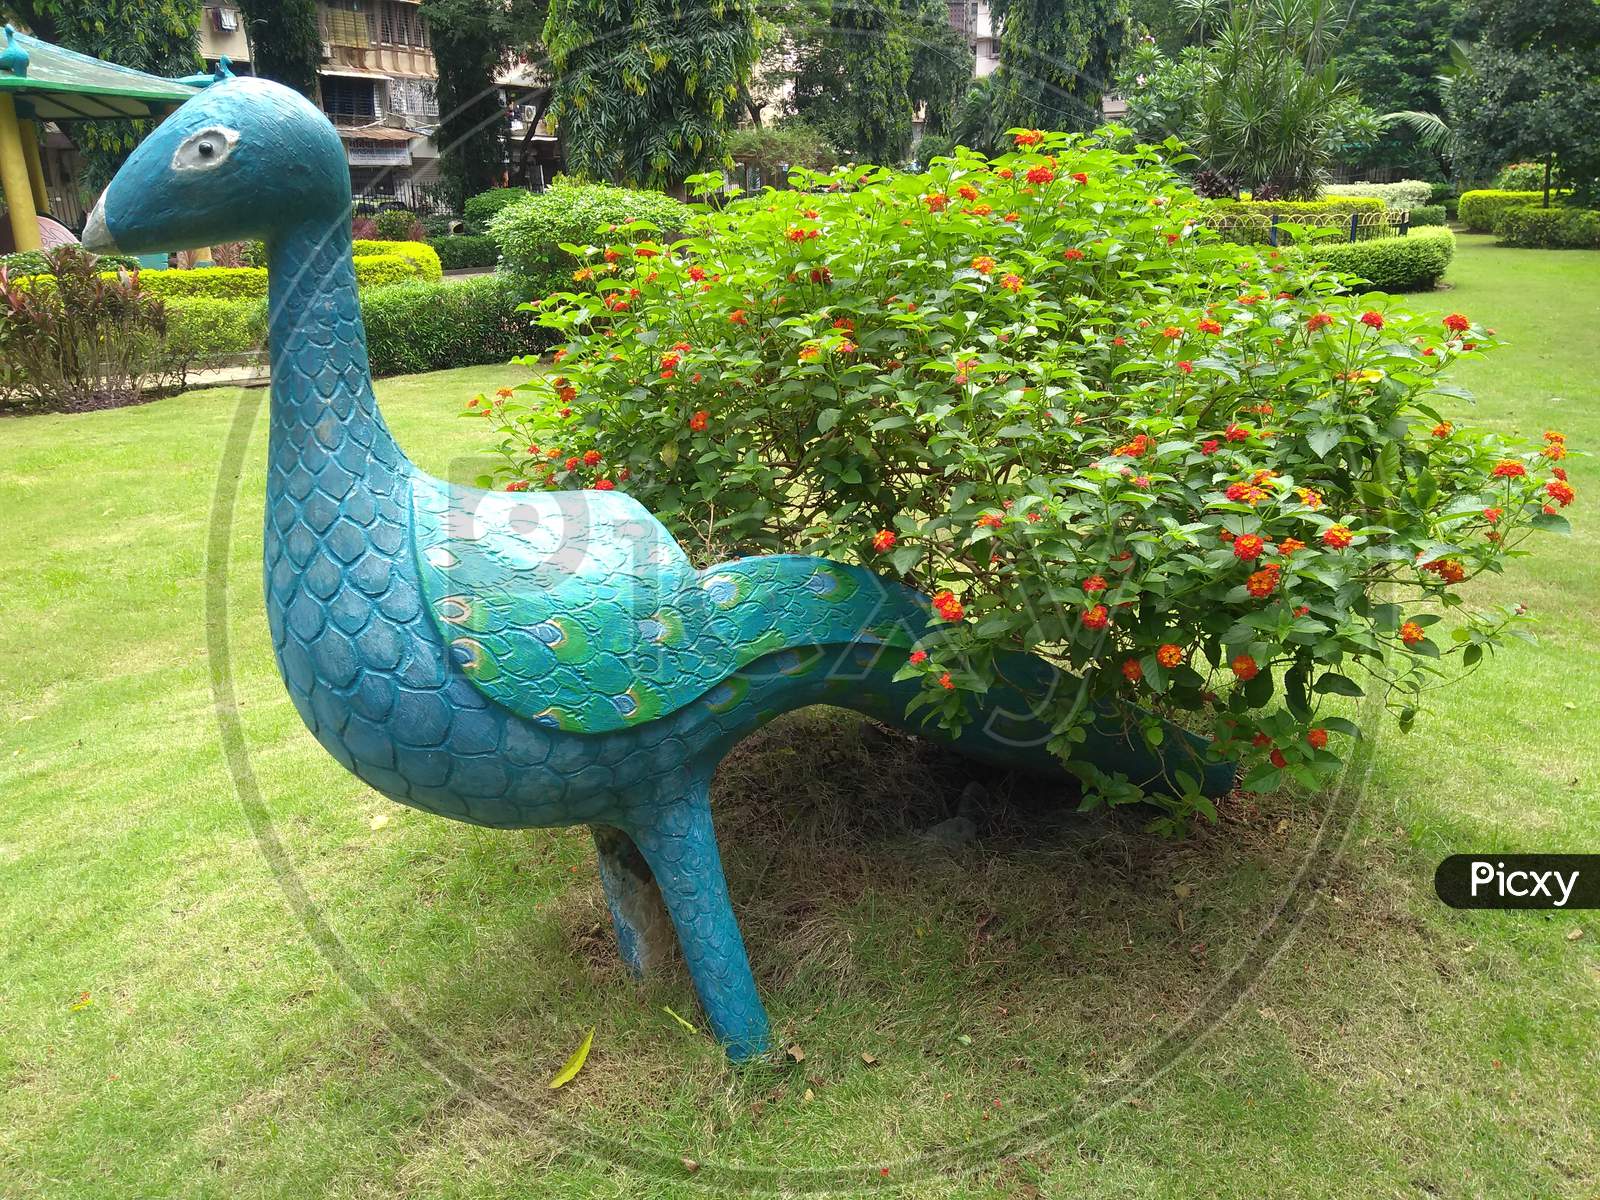 Artificial Peacock With Tree Tail In The Greenery Filled Garden.